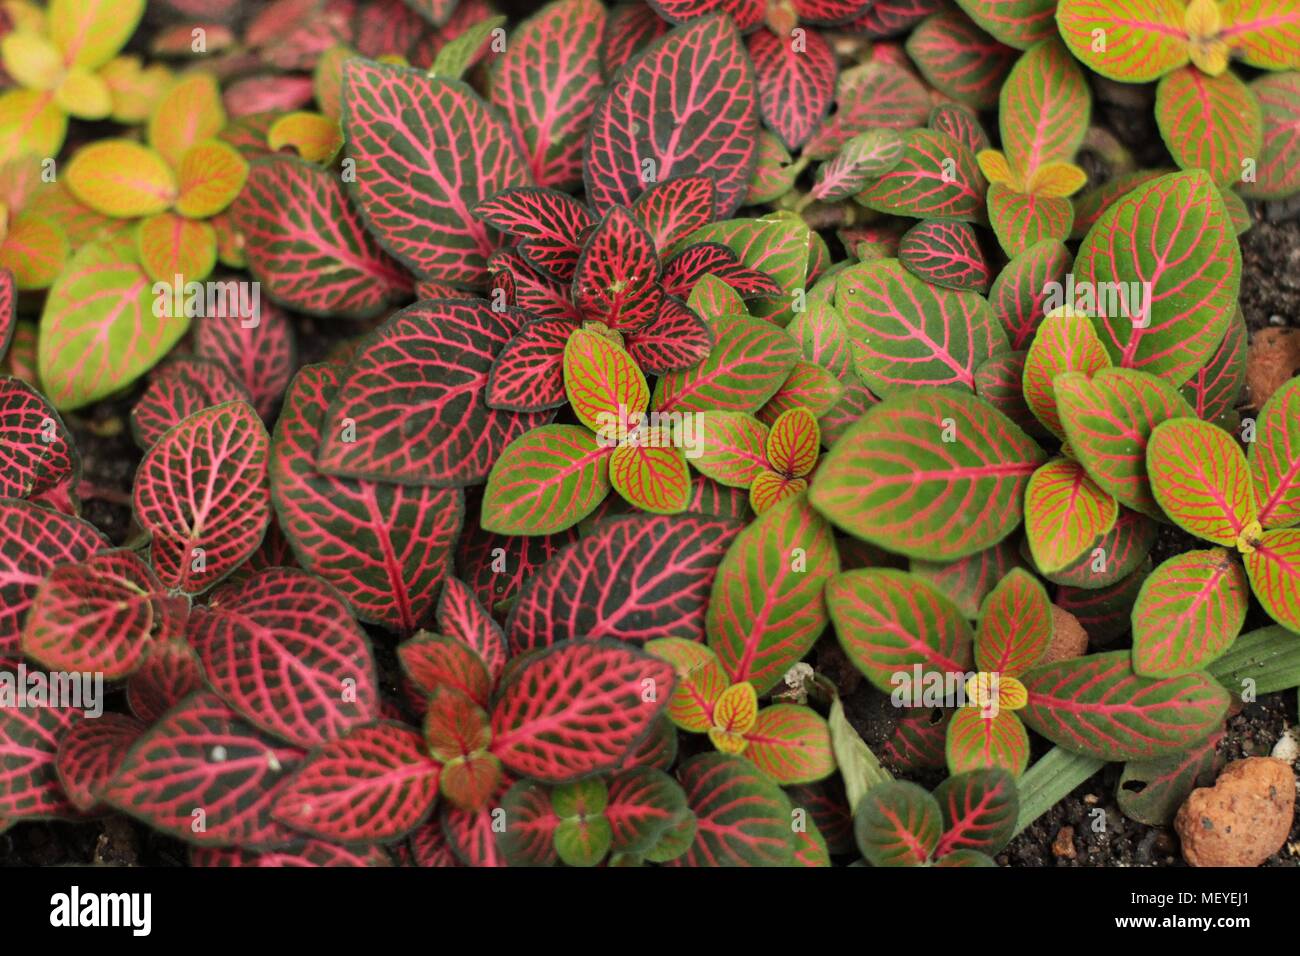 Light pink and light green leaves of nerve plant (Fittonia) Stock Photo